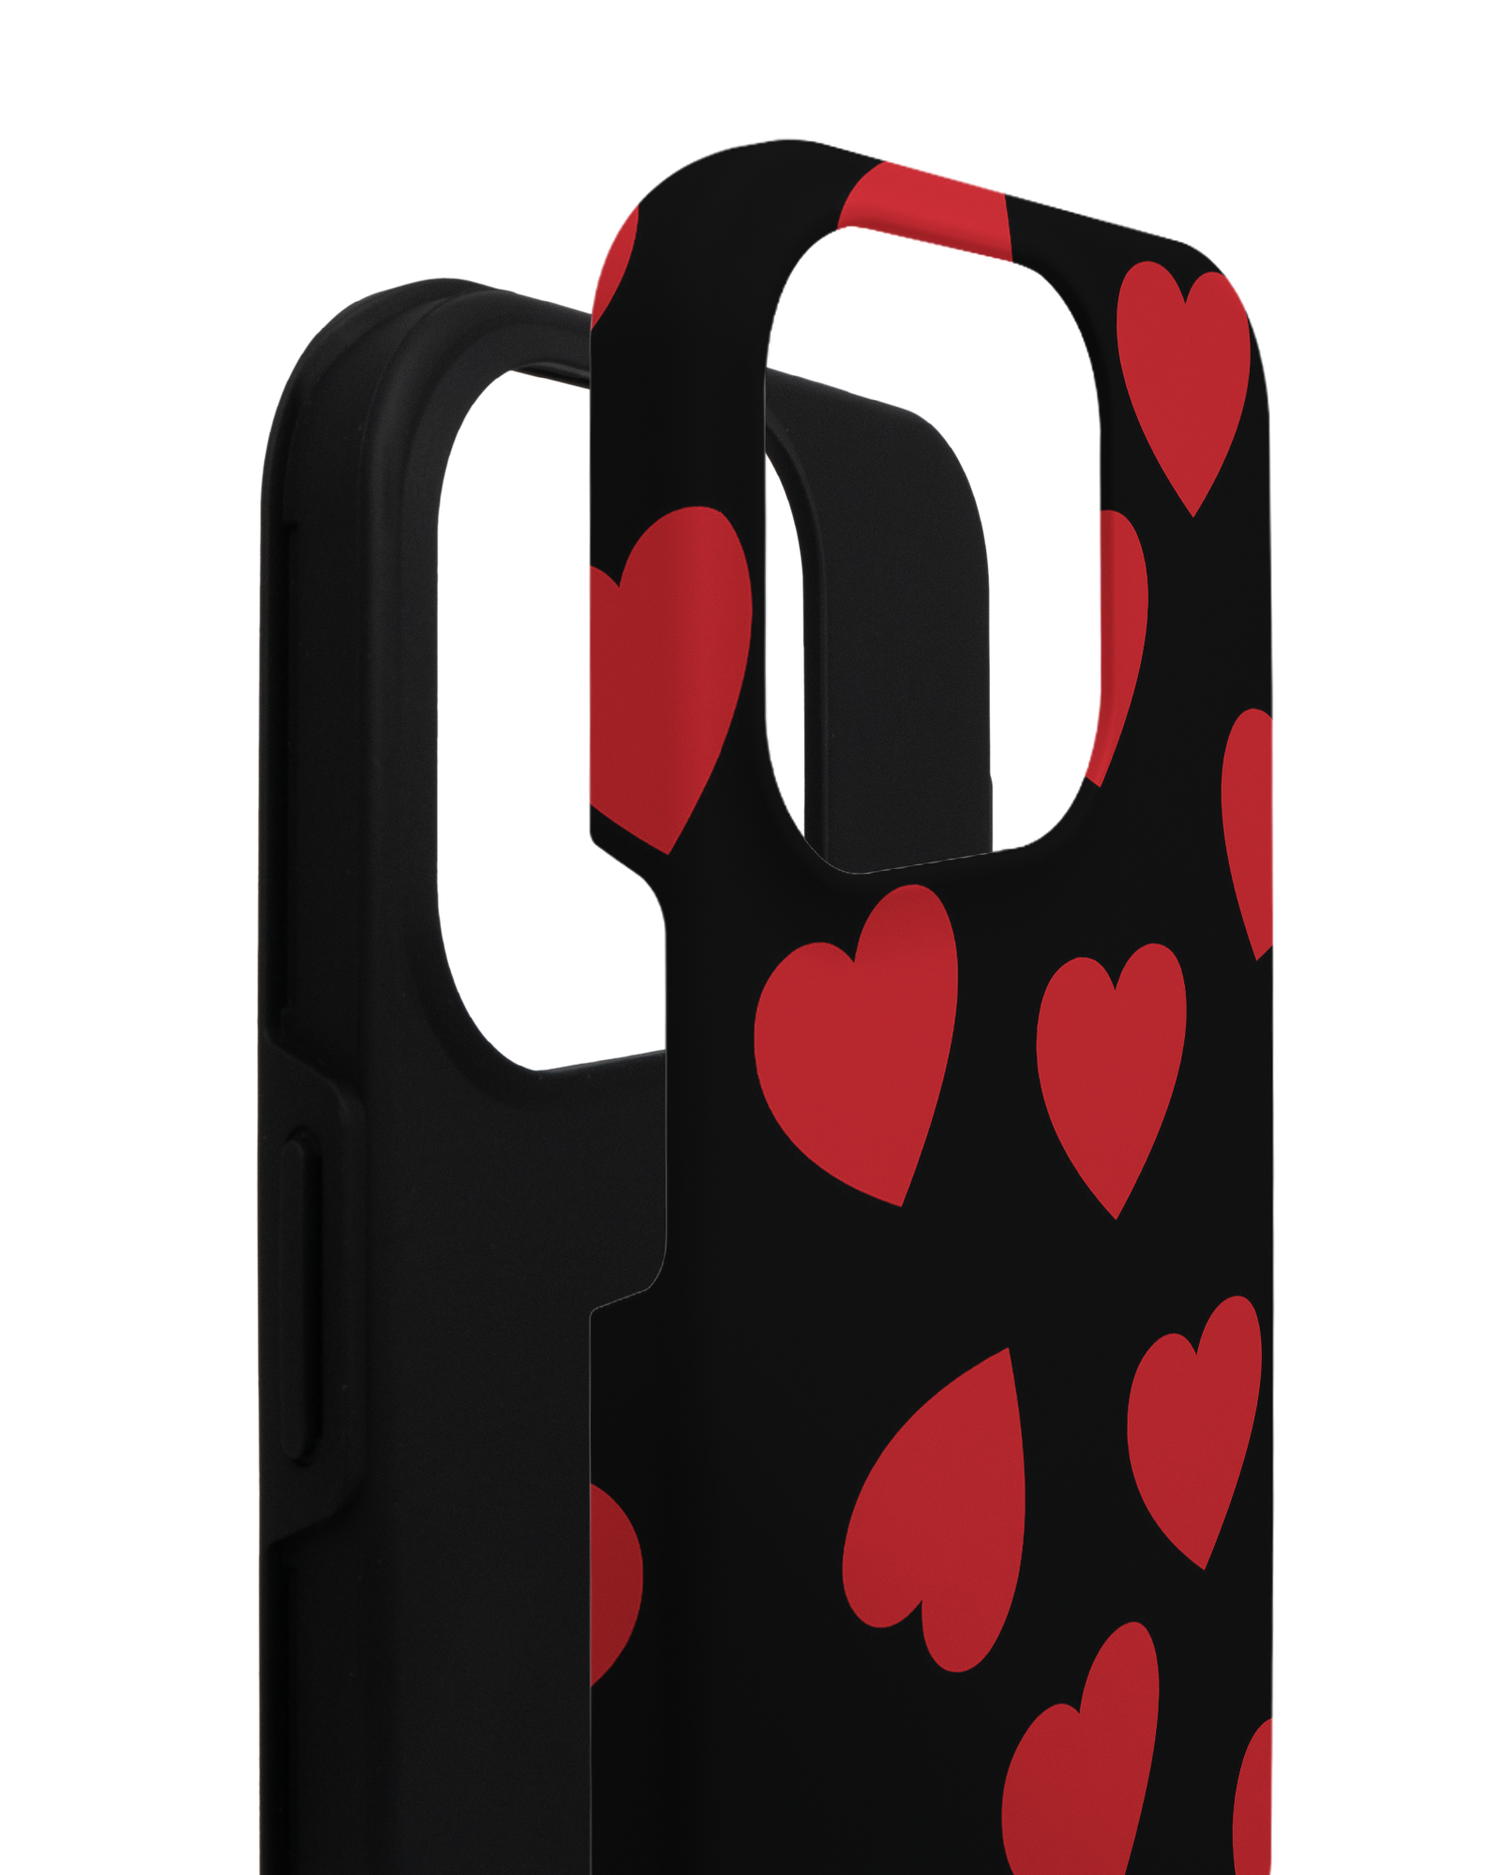 Repeating Hearts Premium Phone Case for Apple iPhone 14 Pro consisting of 2 parts